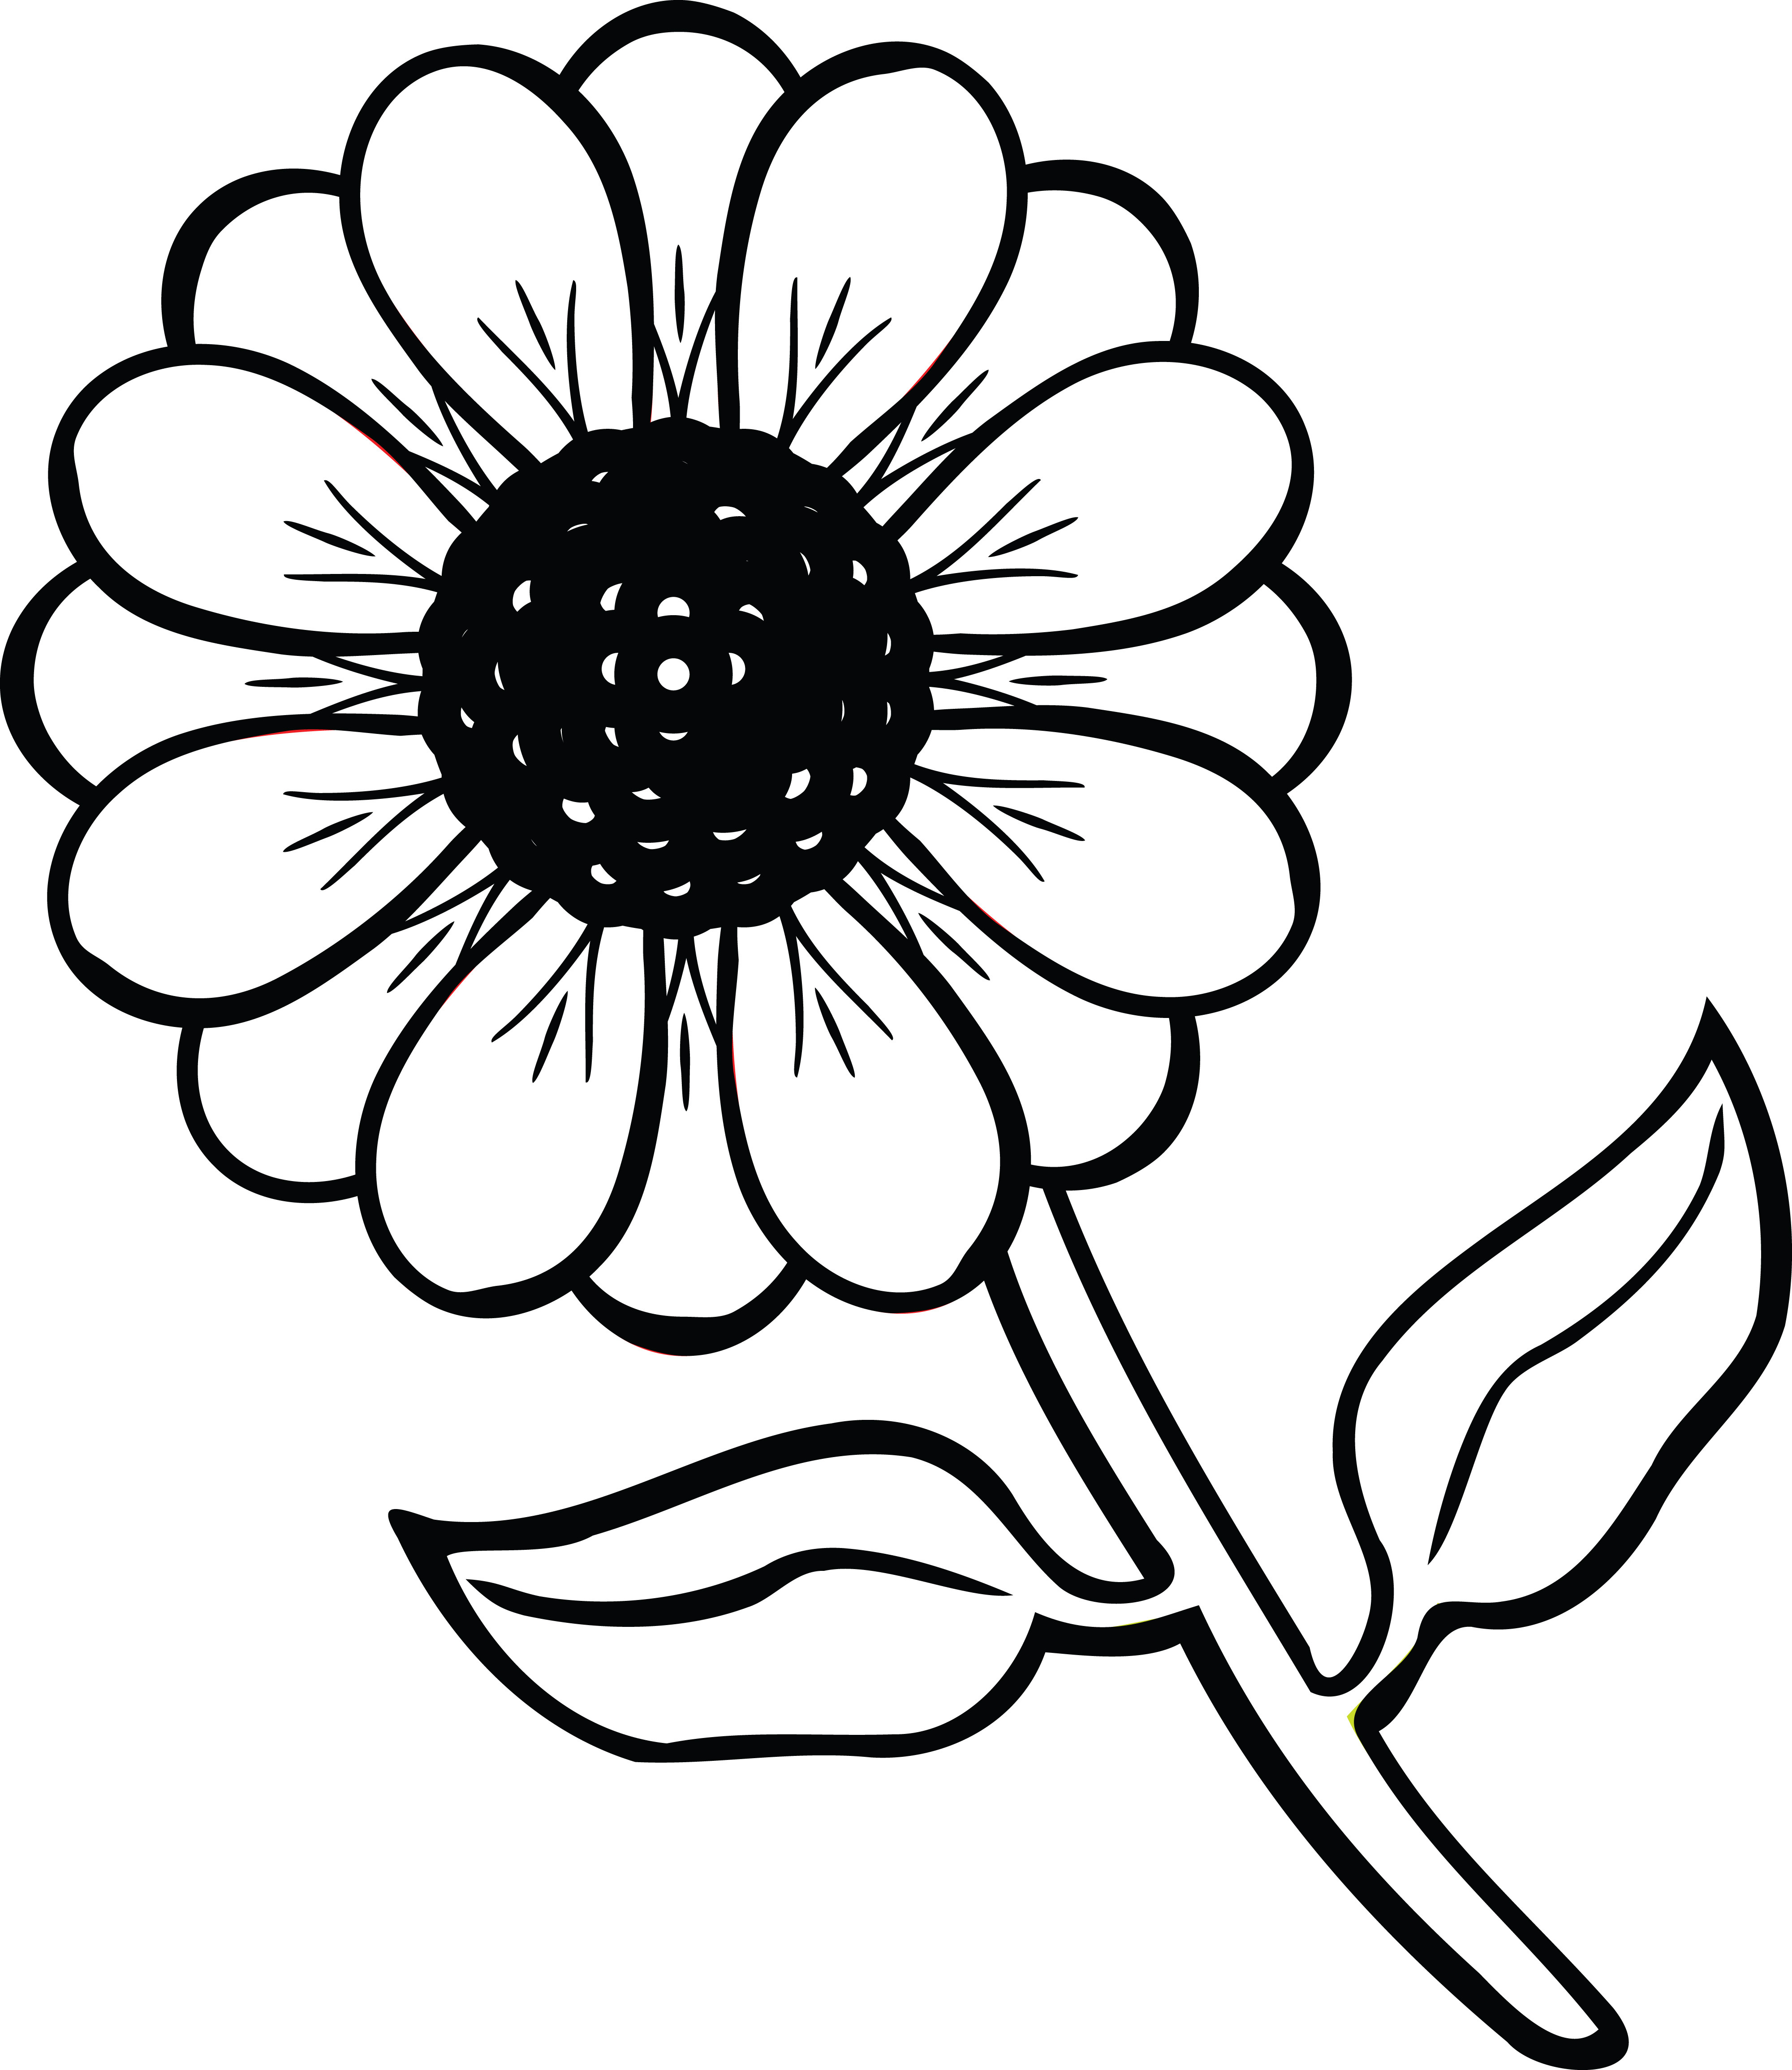 black-and-white-drawing-of-a-flower-free-download-on-clipartmag